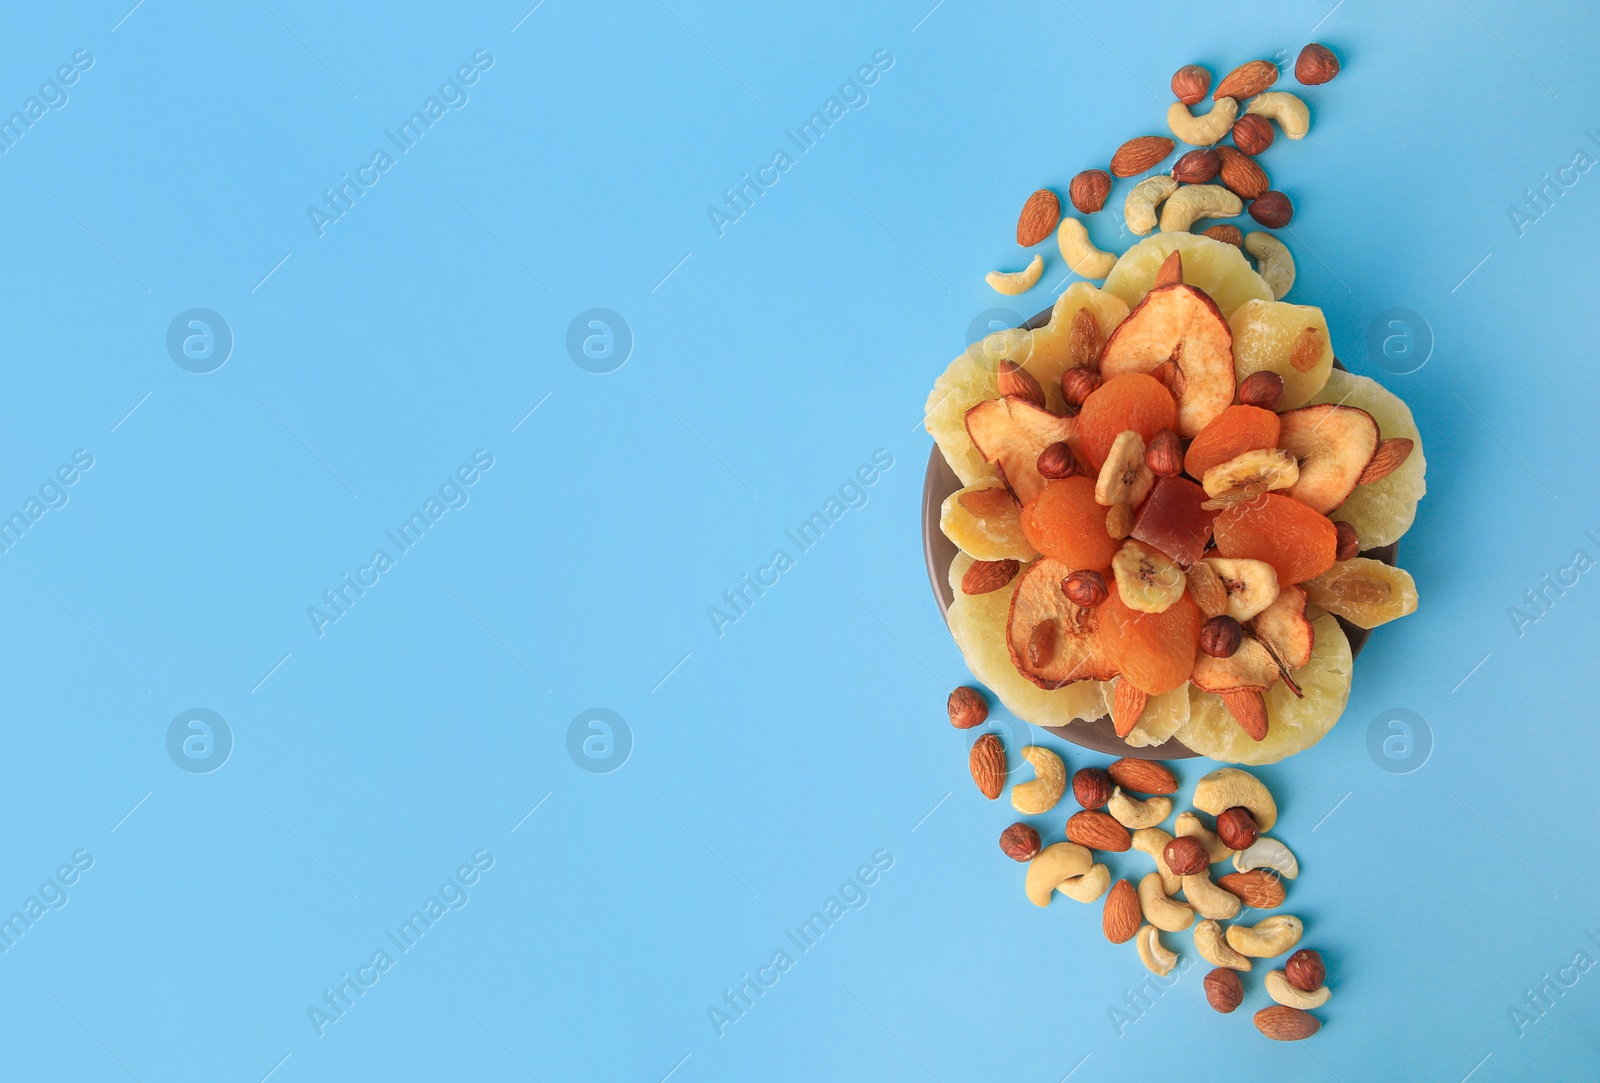 Photo of Mixed dried fruits and nuts on light blue background, flat lay. Space for text